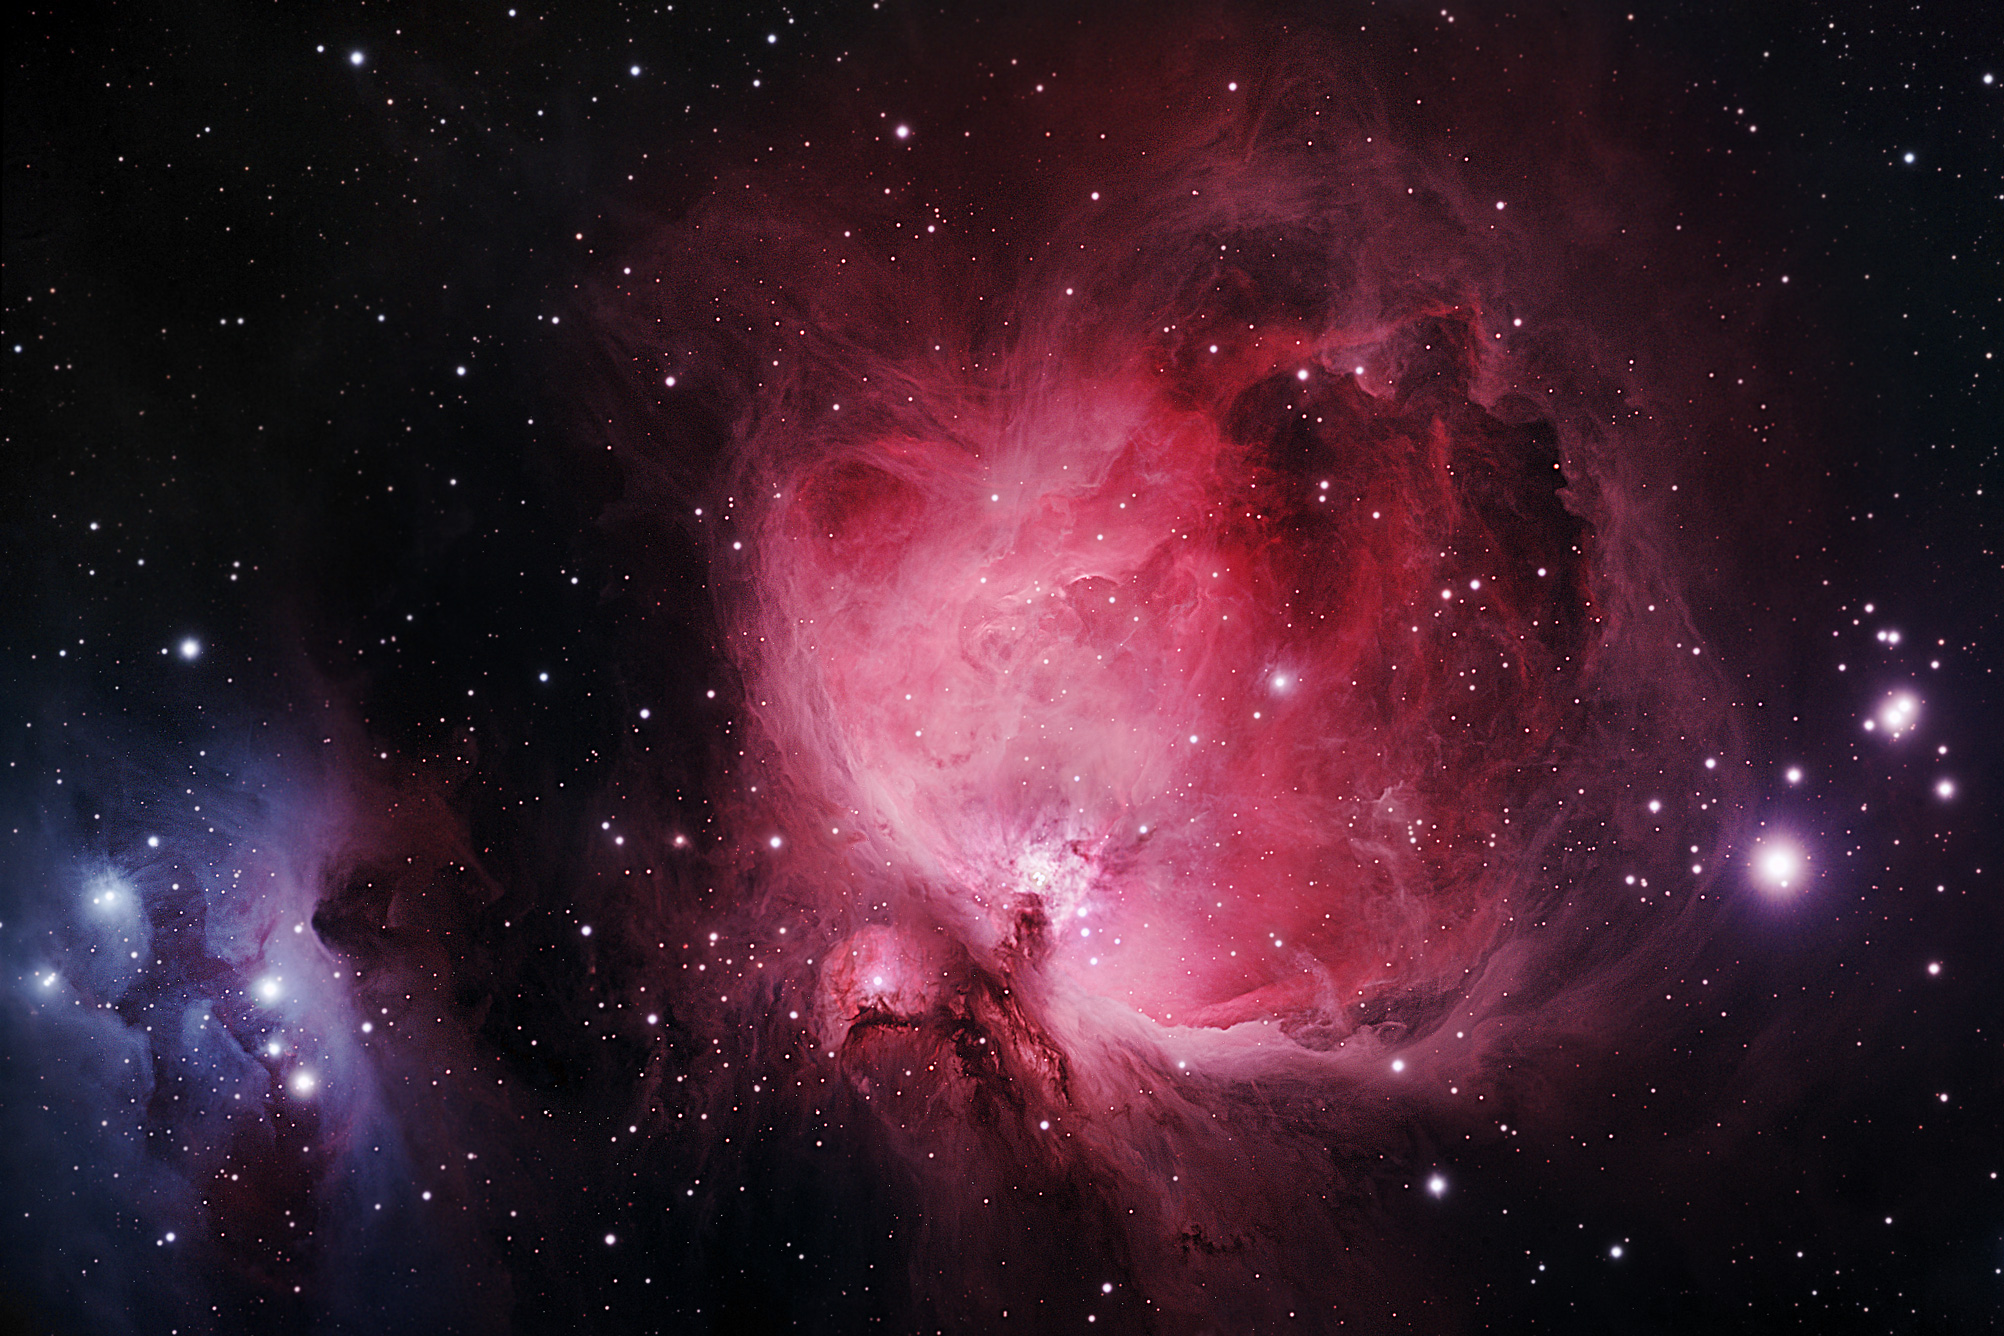 M42 "THE GREAT ORION NEBULA" AND NGC 1977 "THE RUNNING MAN nEBULA" (ORION)